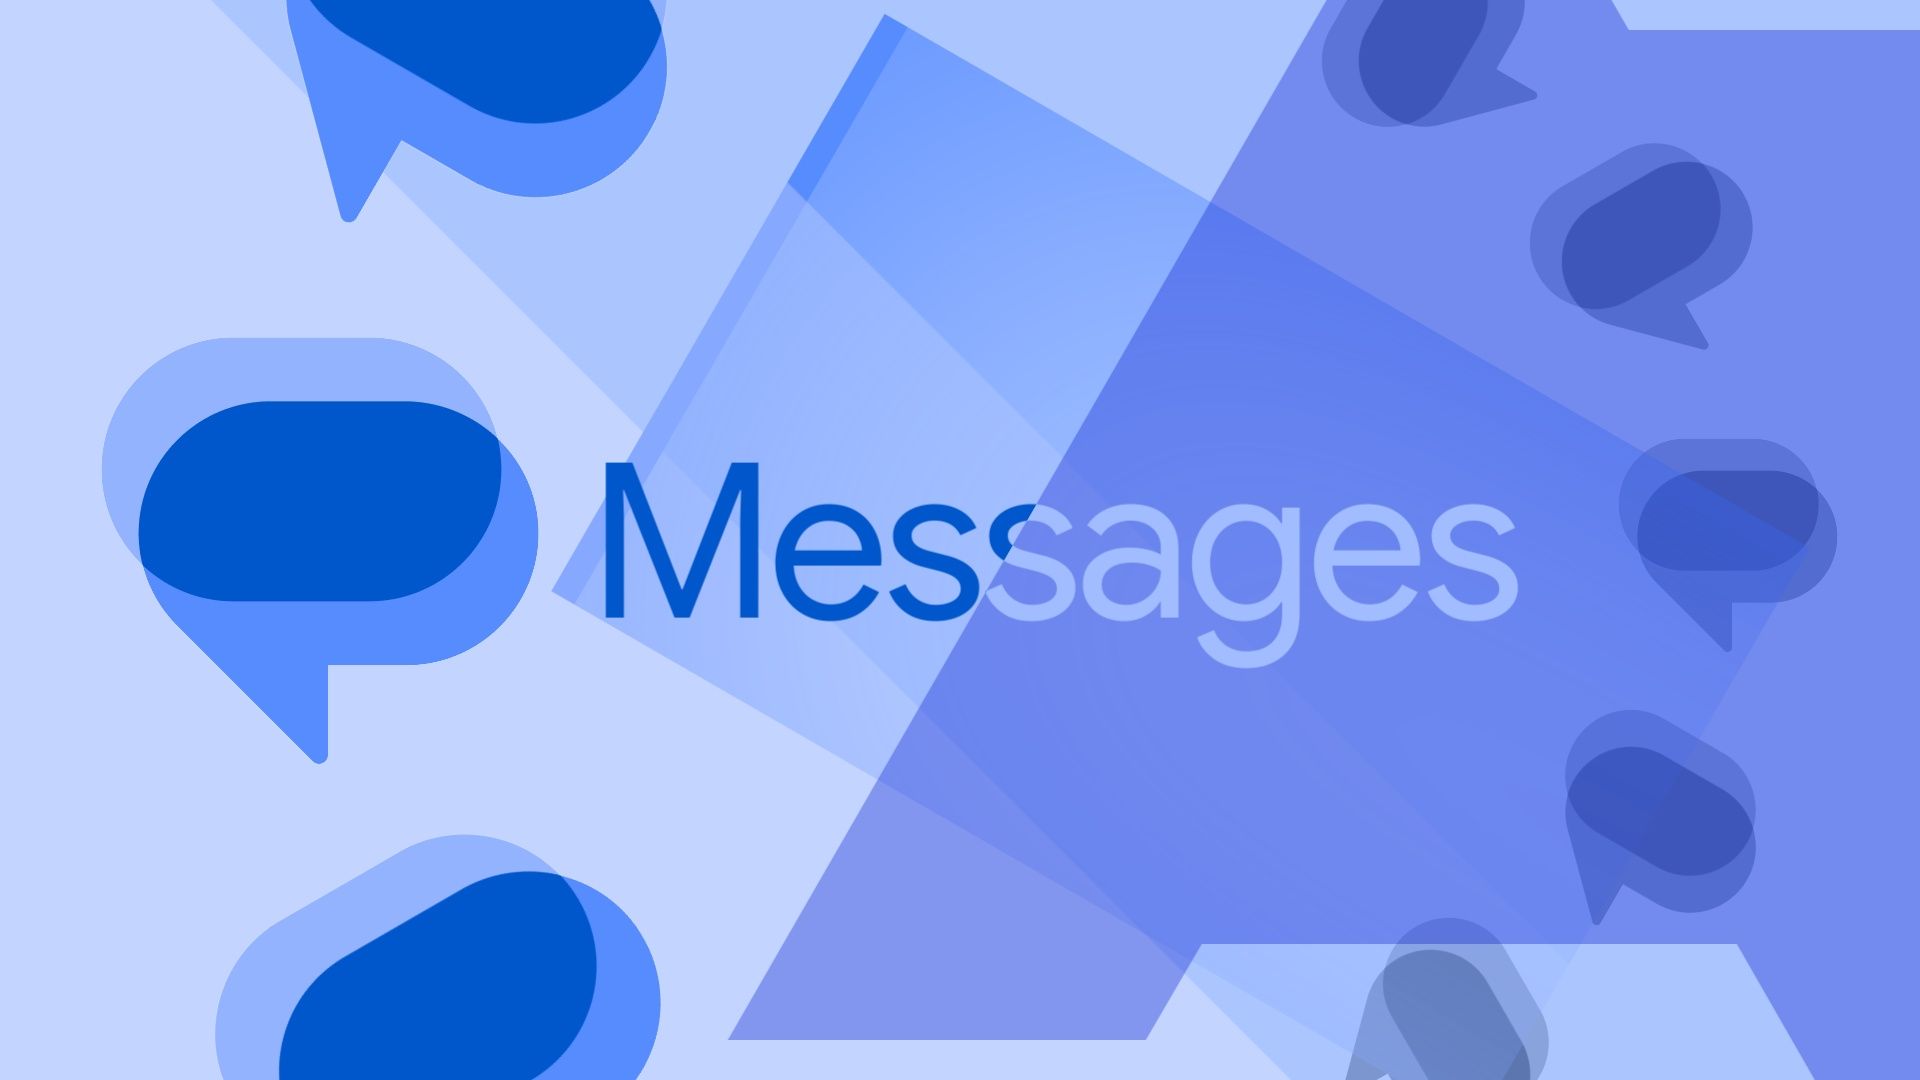 Google Messages may soon allow you to respond with a double tap